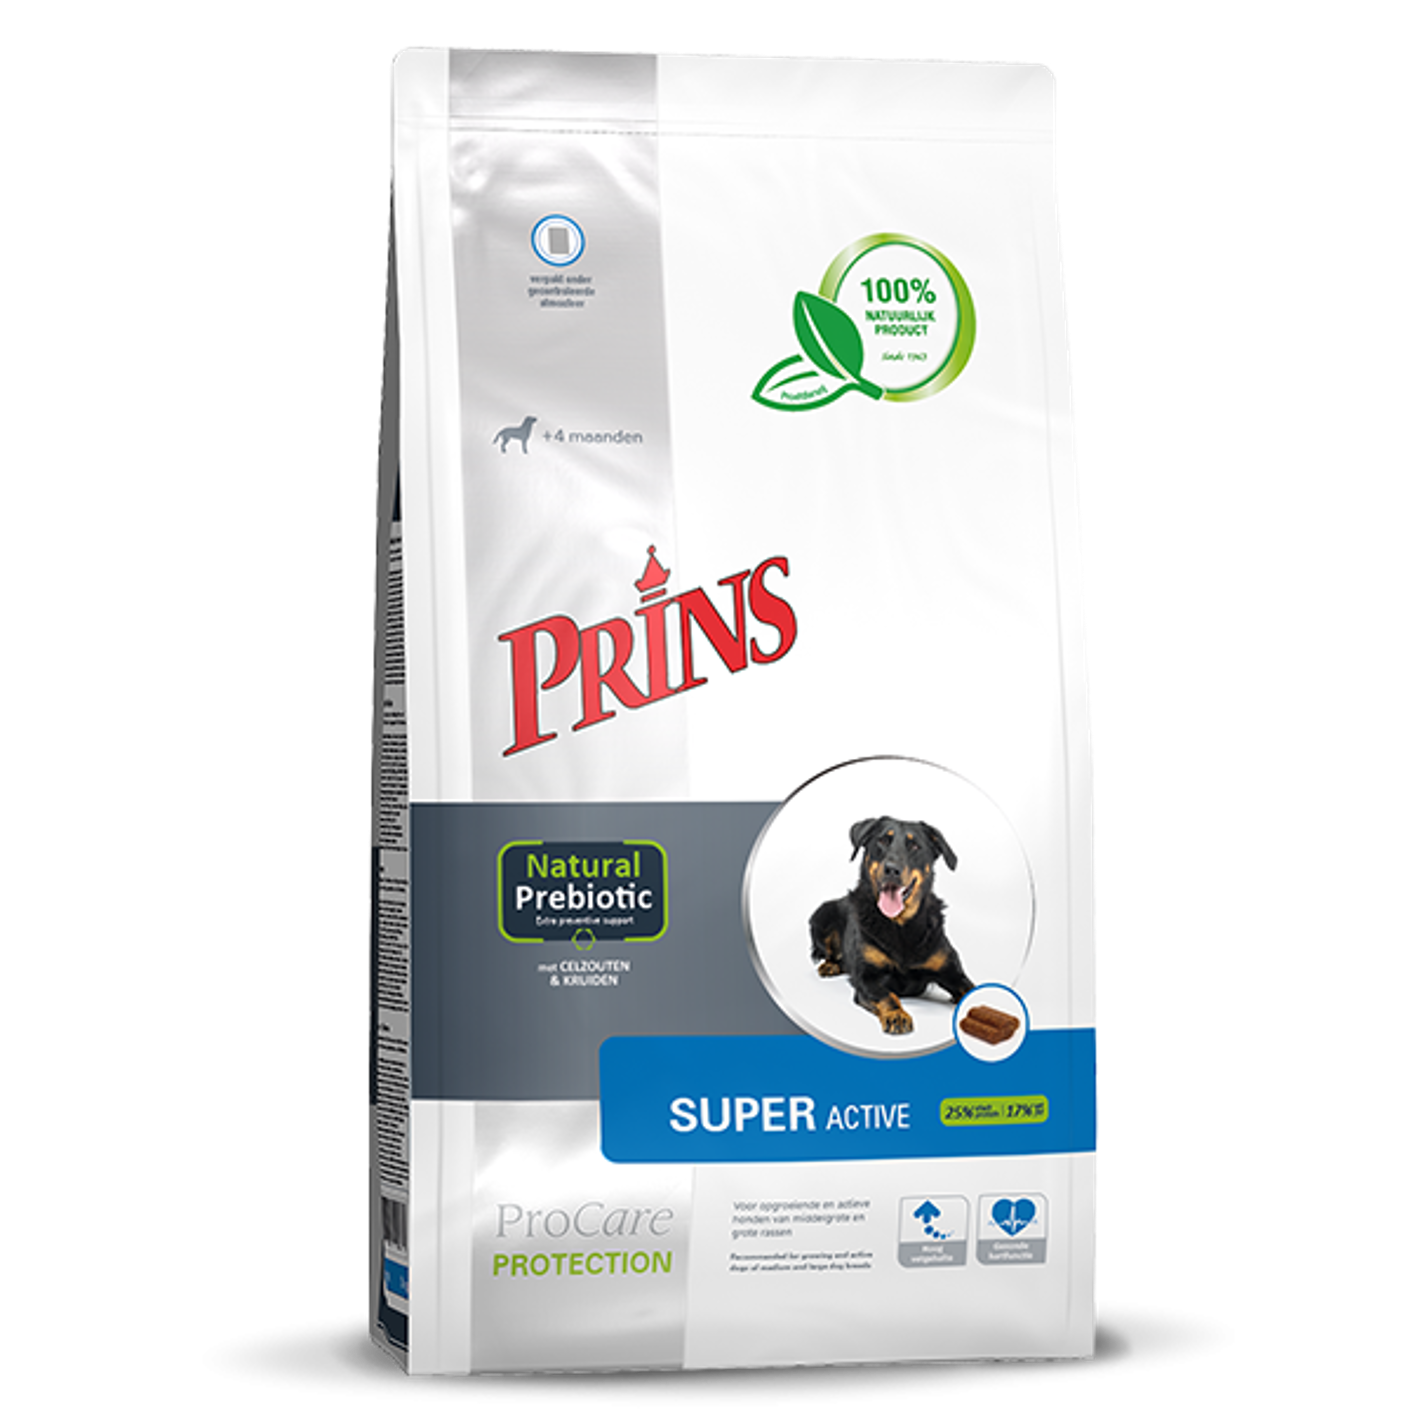 Prins ProCare Protection SUPER ACTIVE Dry Dog Food With Chicken, 20kg